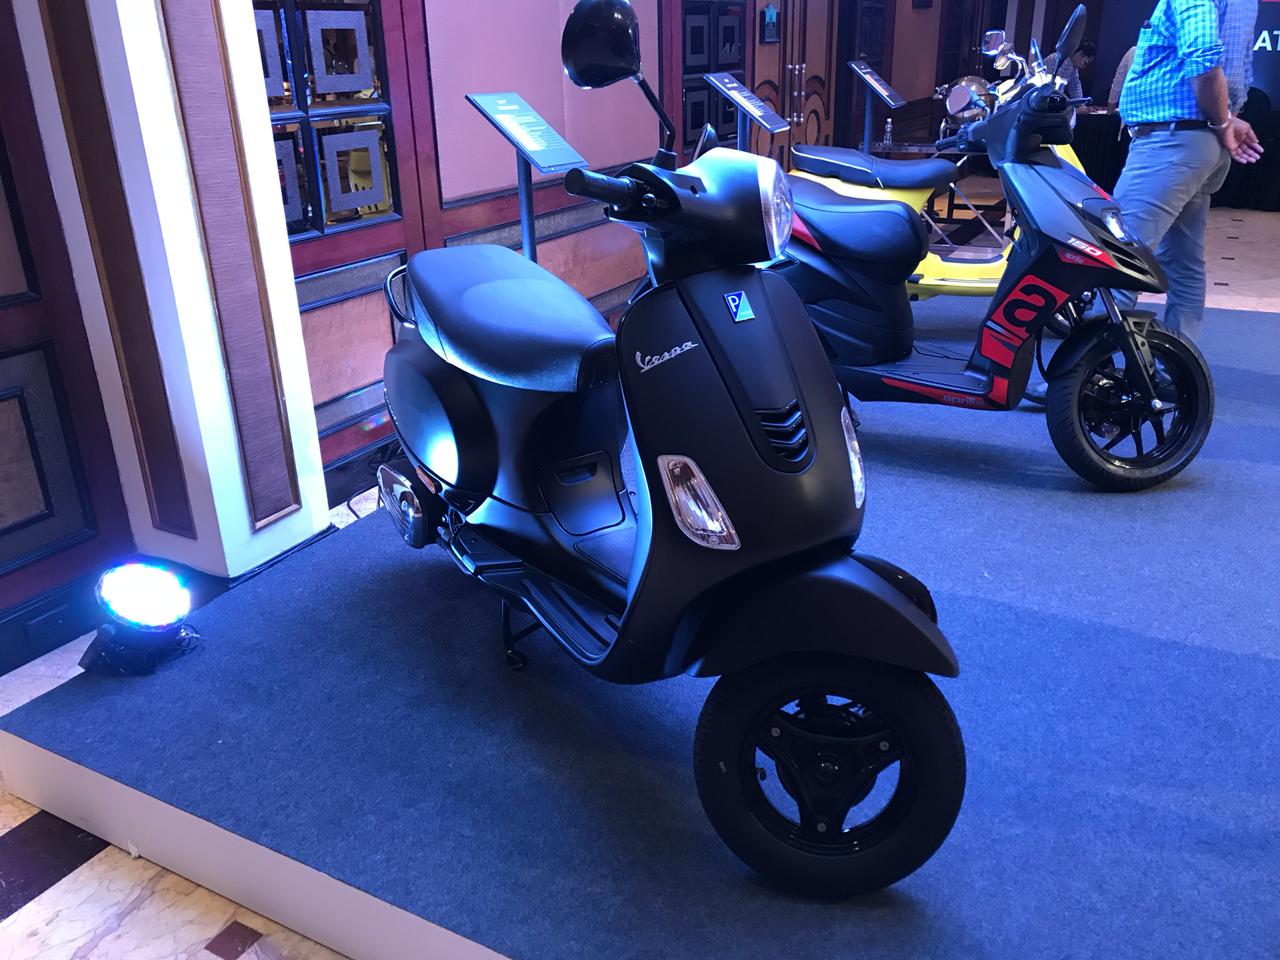 <p>There&rsquo;s a slew of updates to existing models from Piaggio&rsquo;s Aprilia and Vespa brands, though no all-new models being launched today.</p>